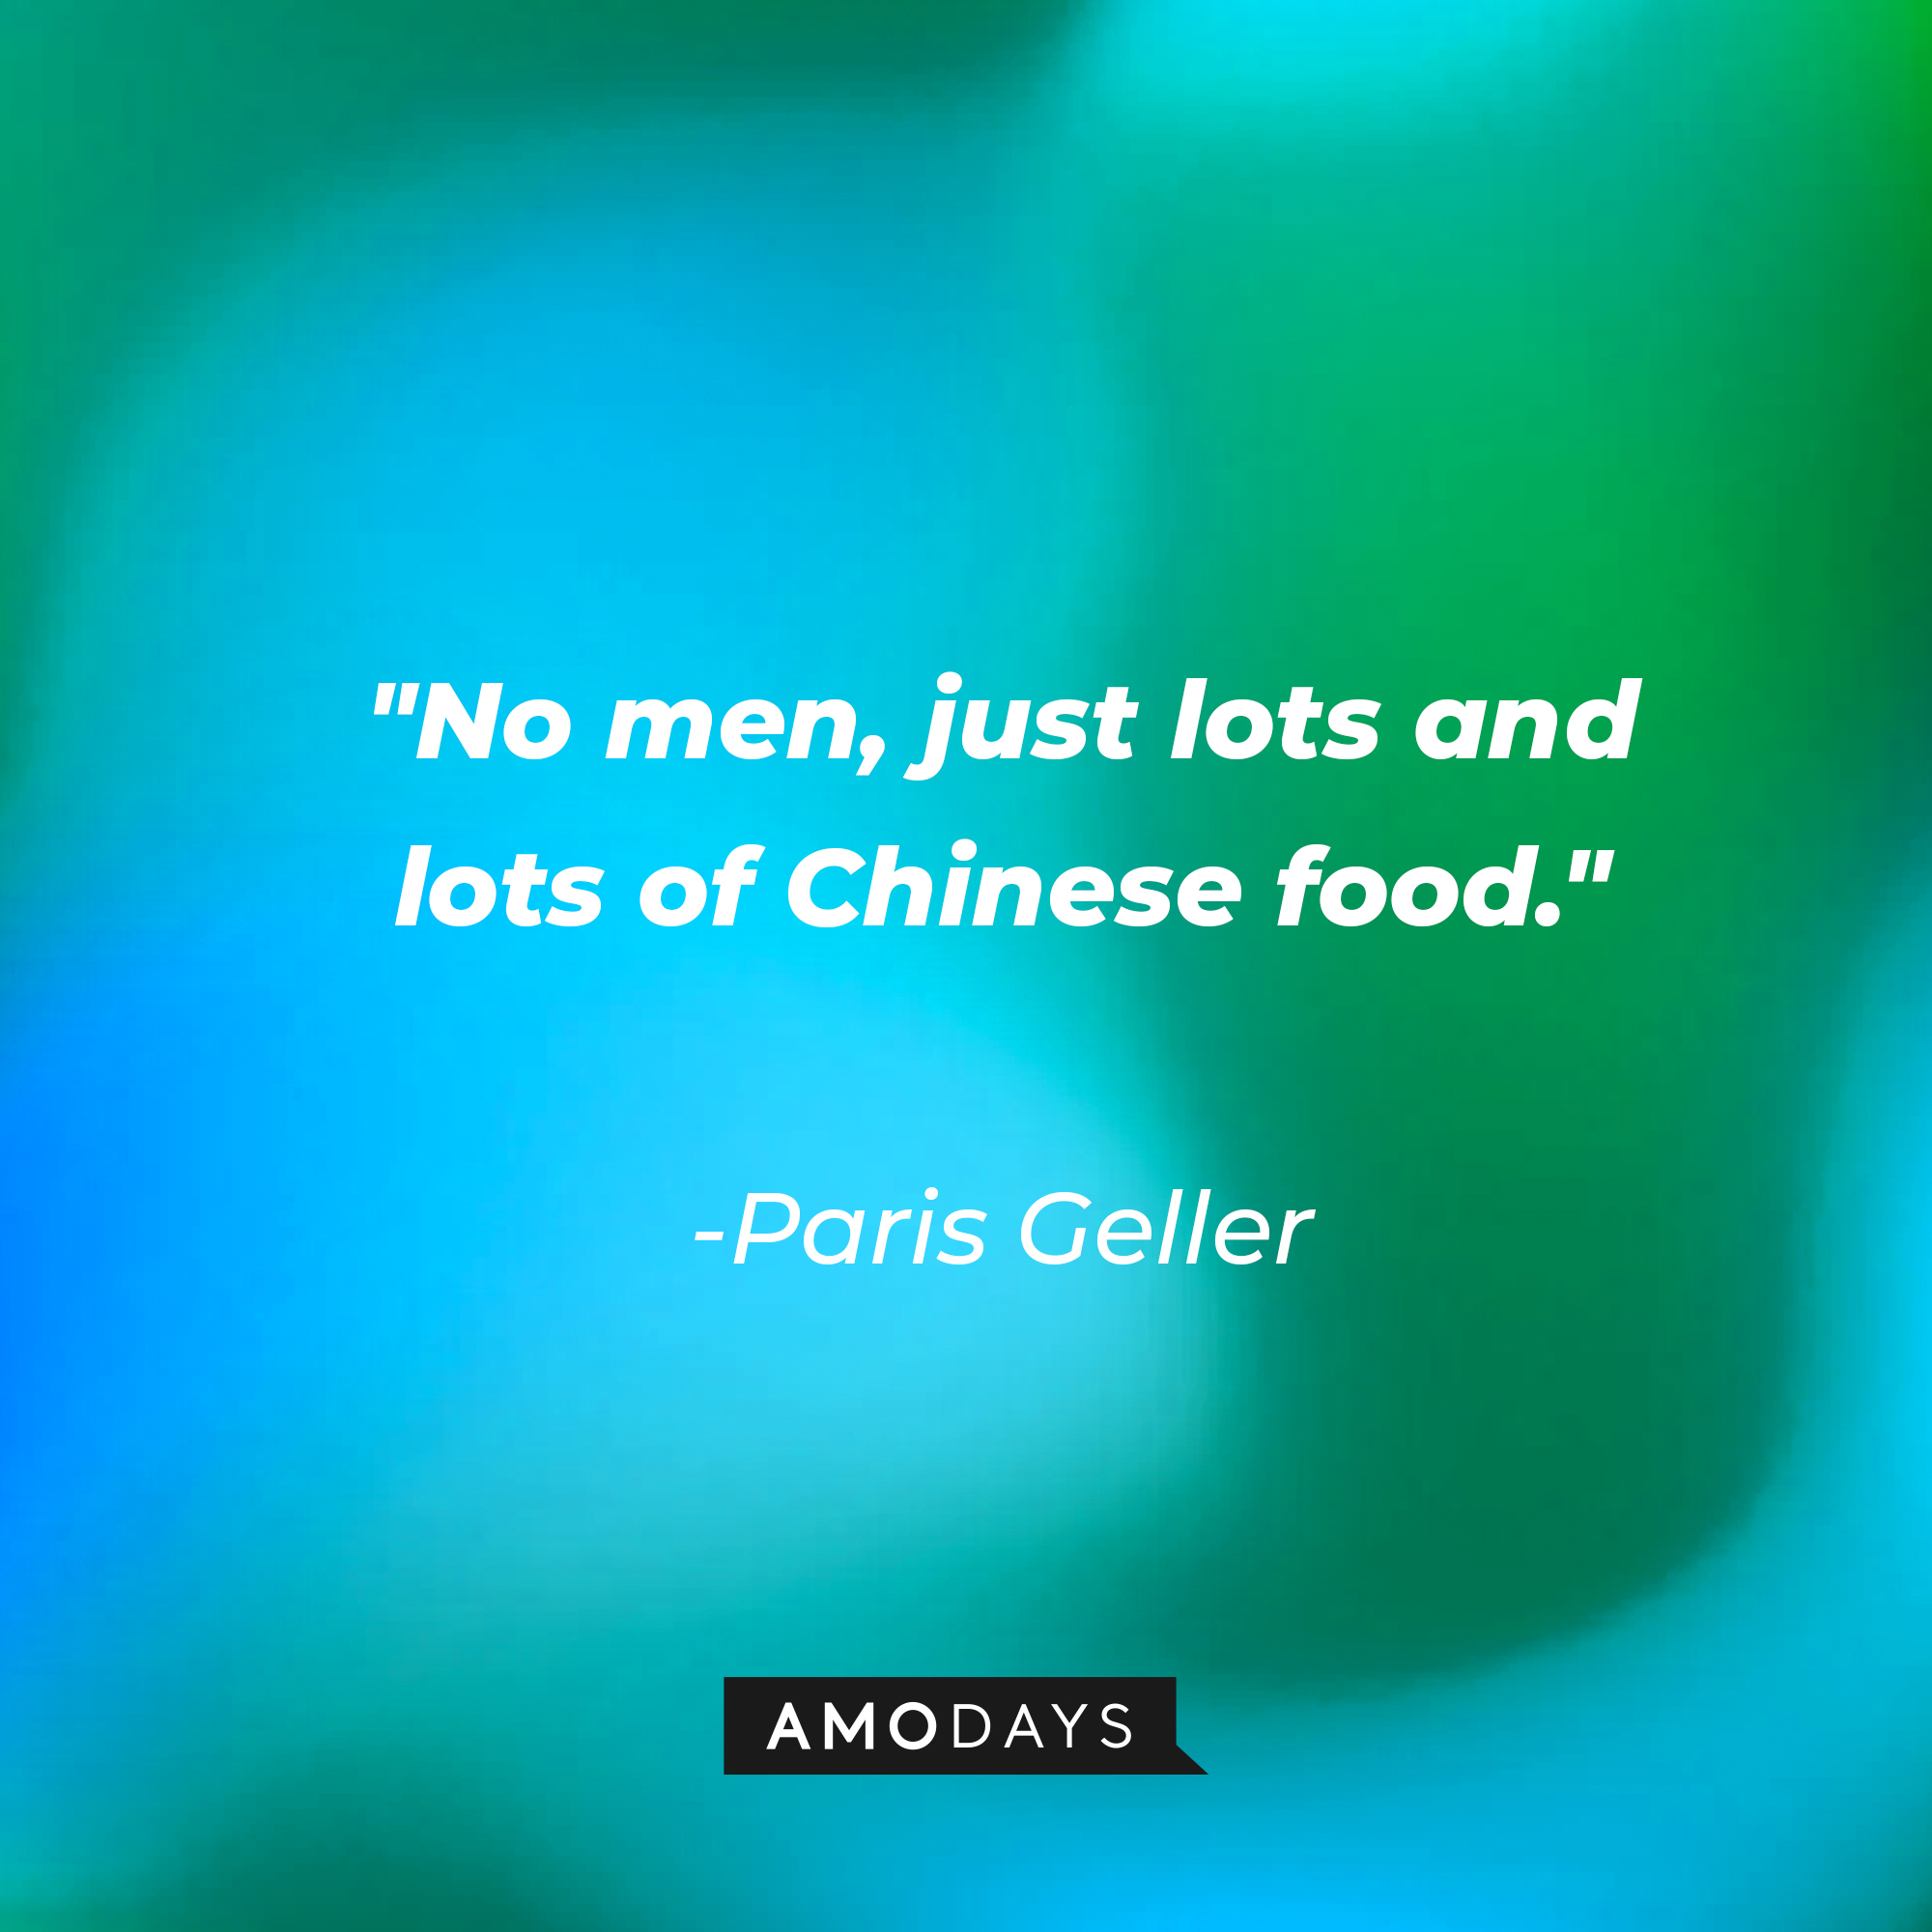 Paris Geller’s quote: “No men, just lots and lots of Chinese food.” | Source: AmoDays